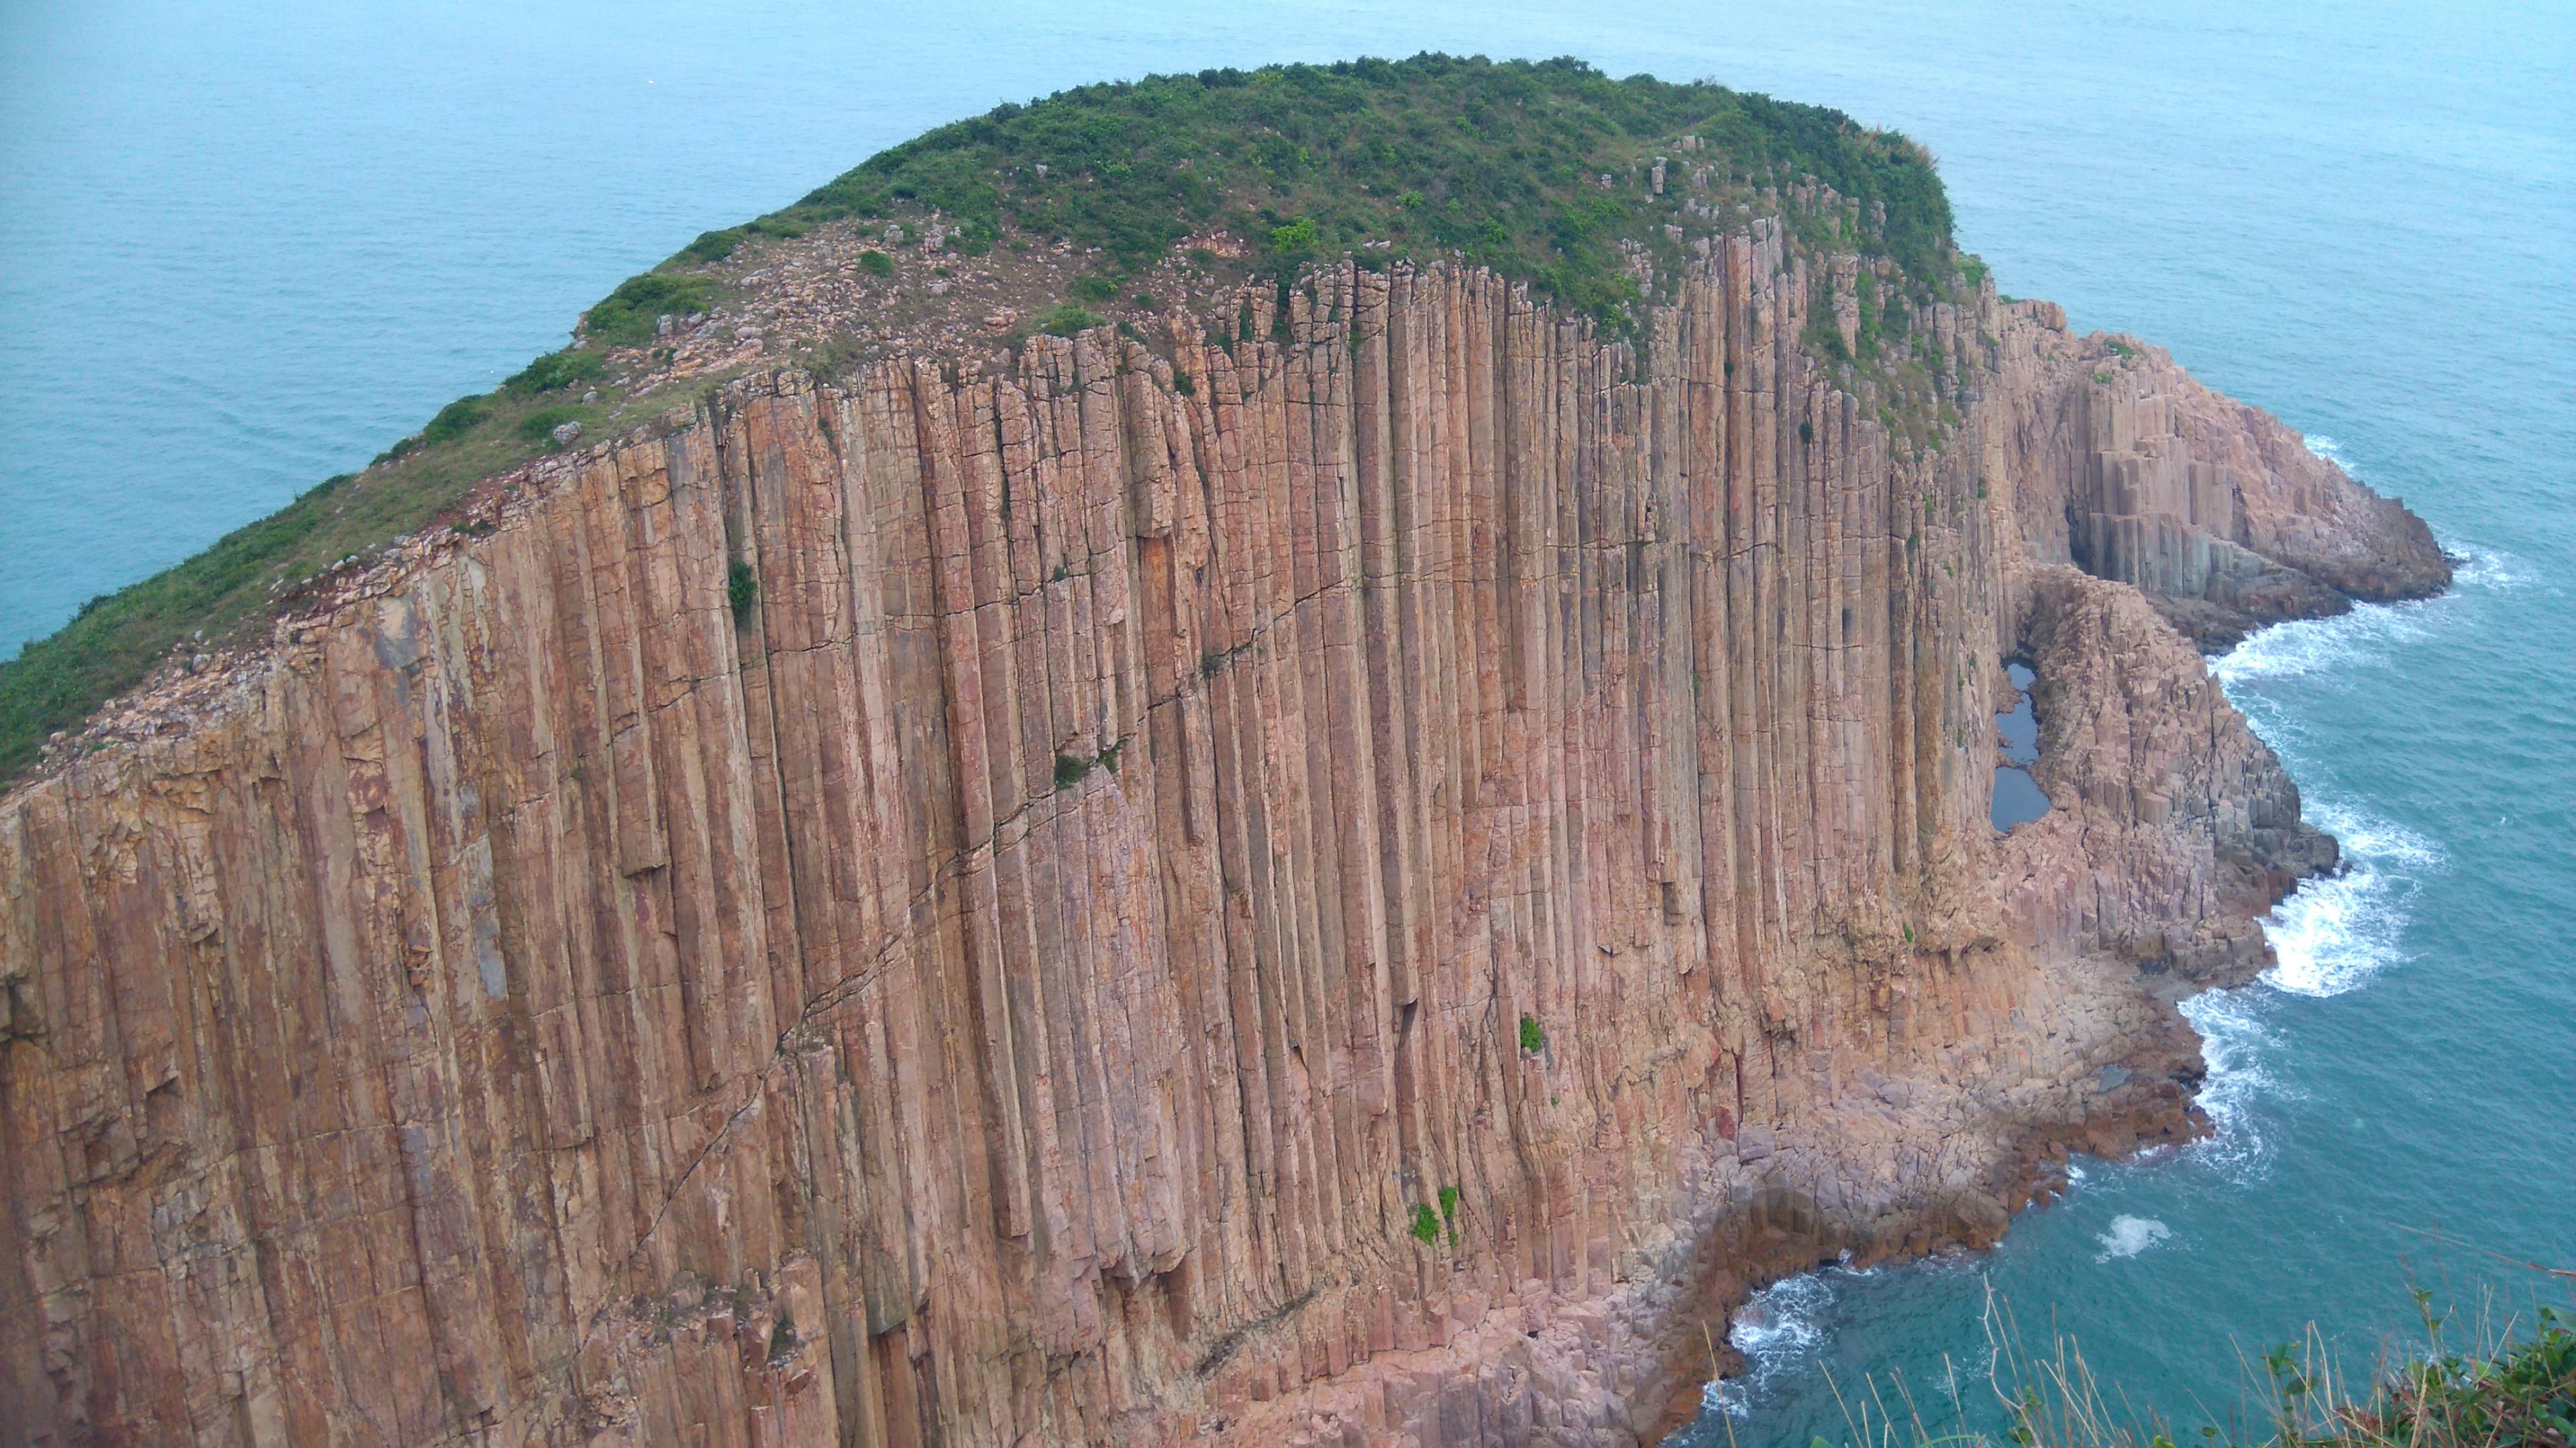 Cover image of this place Sai Kung Geopark